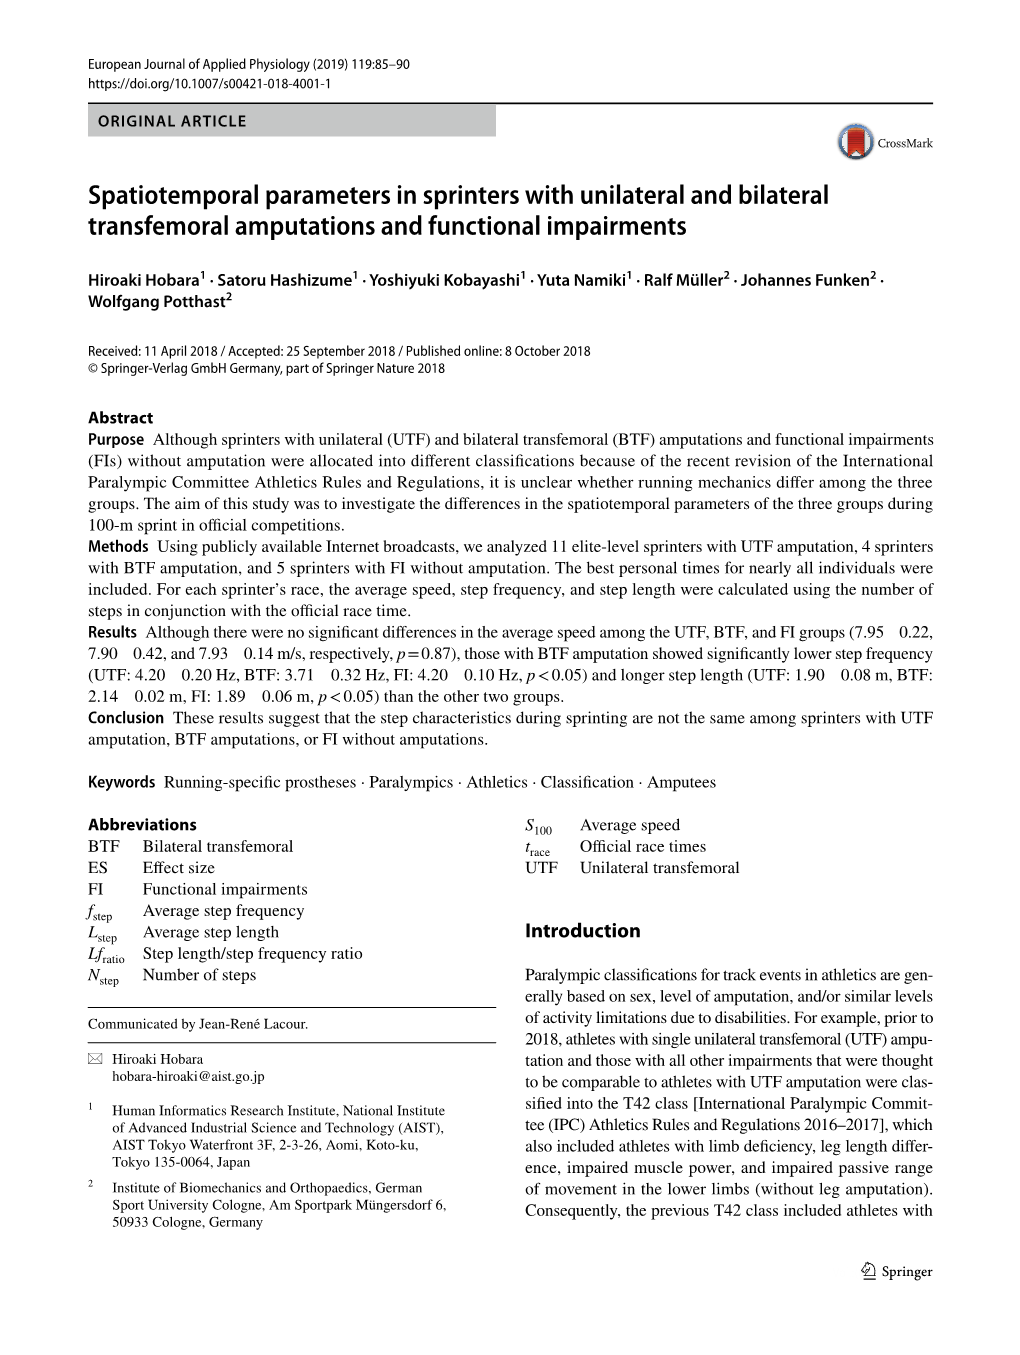 Spatiotemporal Parameters in Sprinters with Unilateral and Bilateral Transfemoral Amputations and Functional Impairments